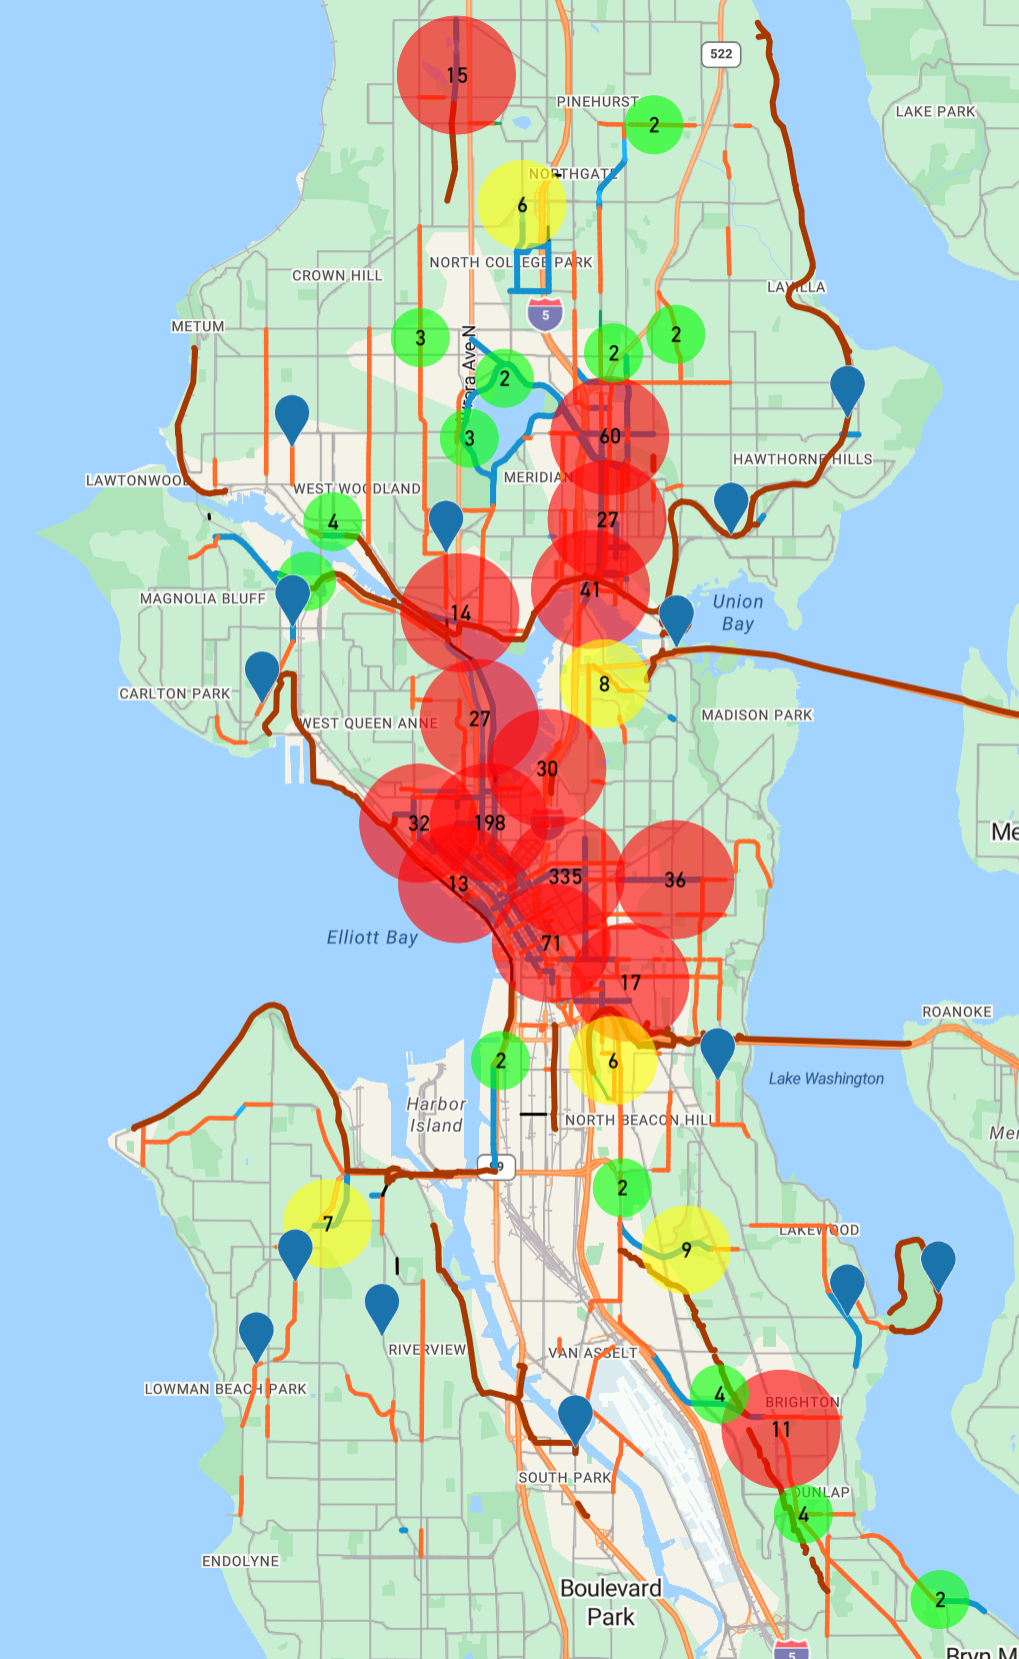 A map of Seattle showing reports of blocked bike lanes